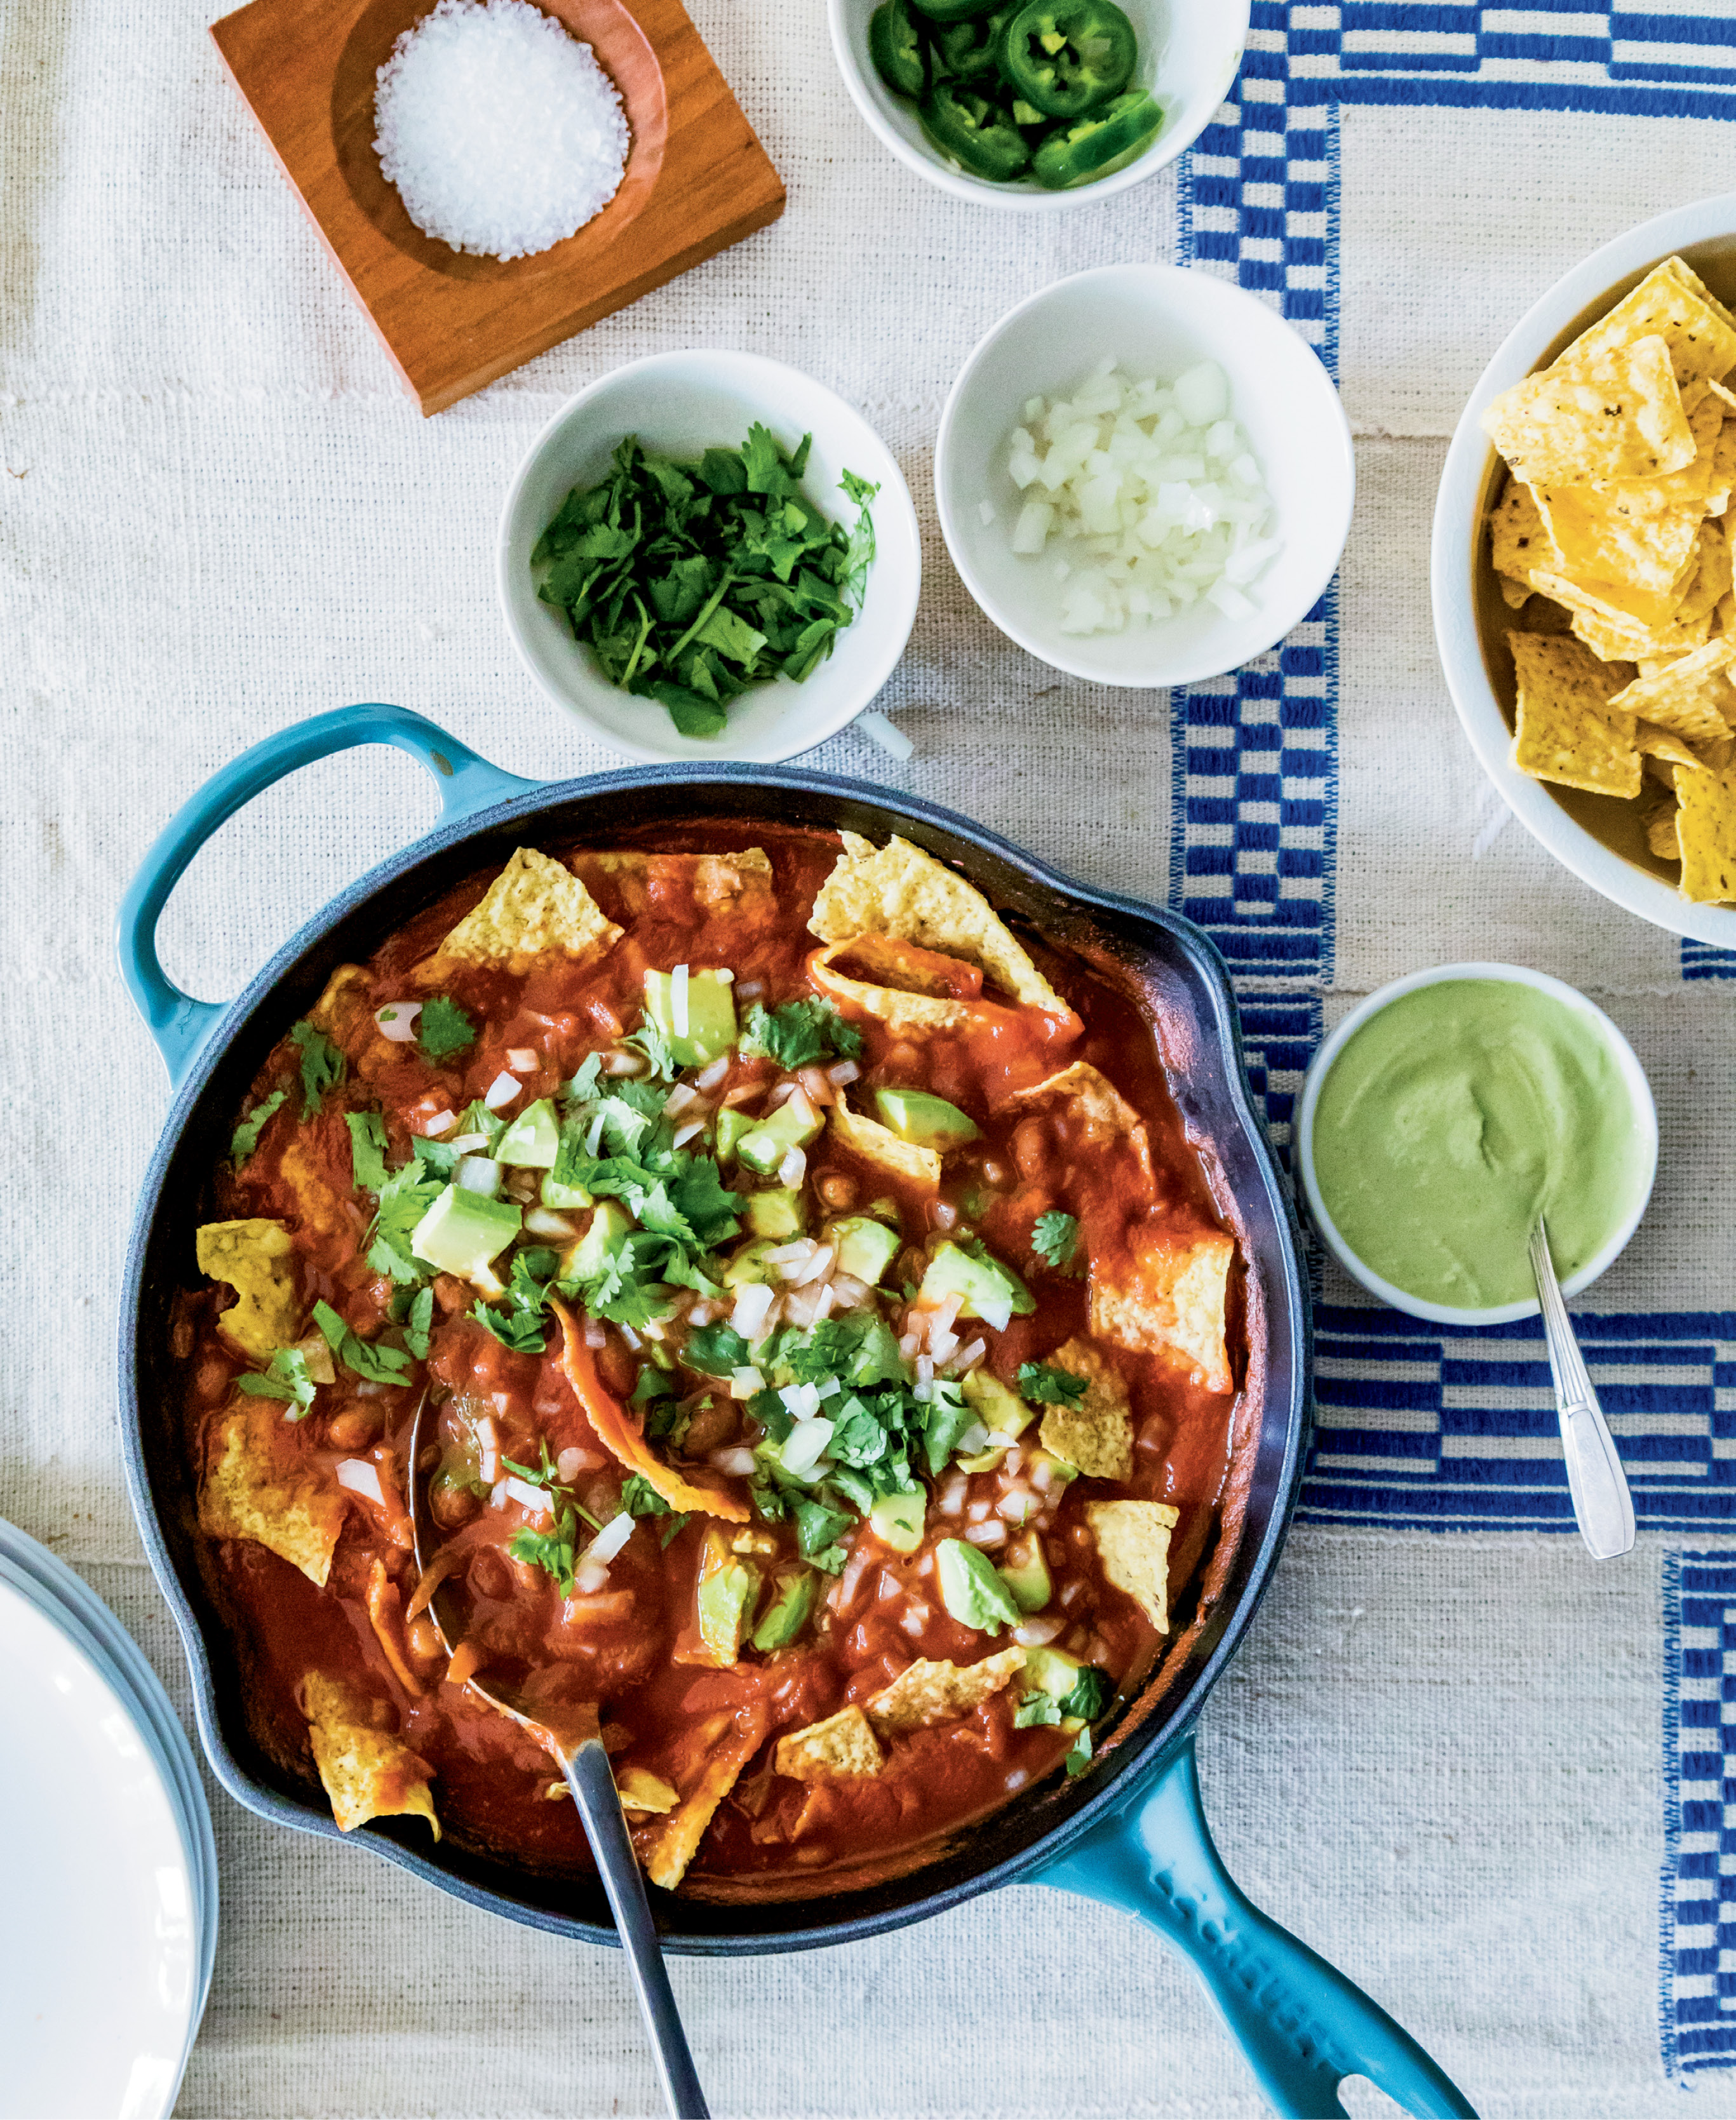 A crowd-pleaser from One Part Plant: chilaquiles with cilantro cream